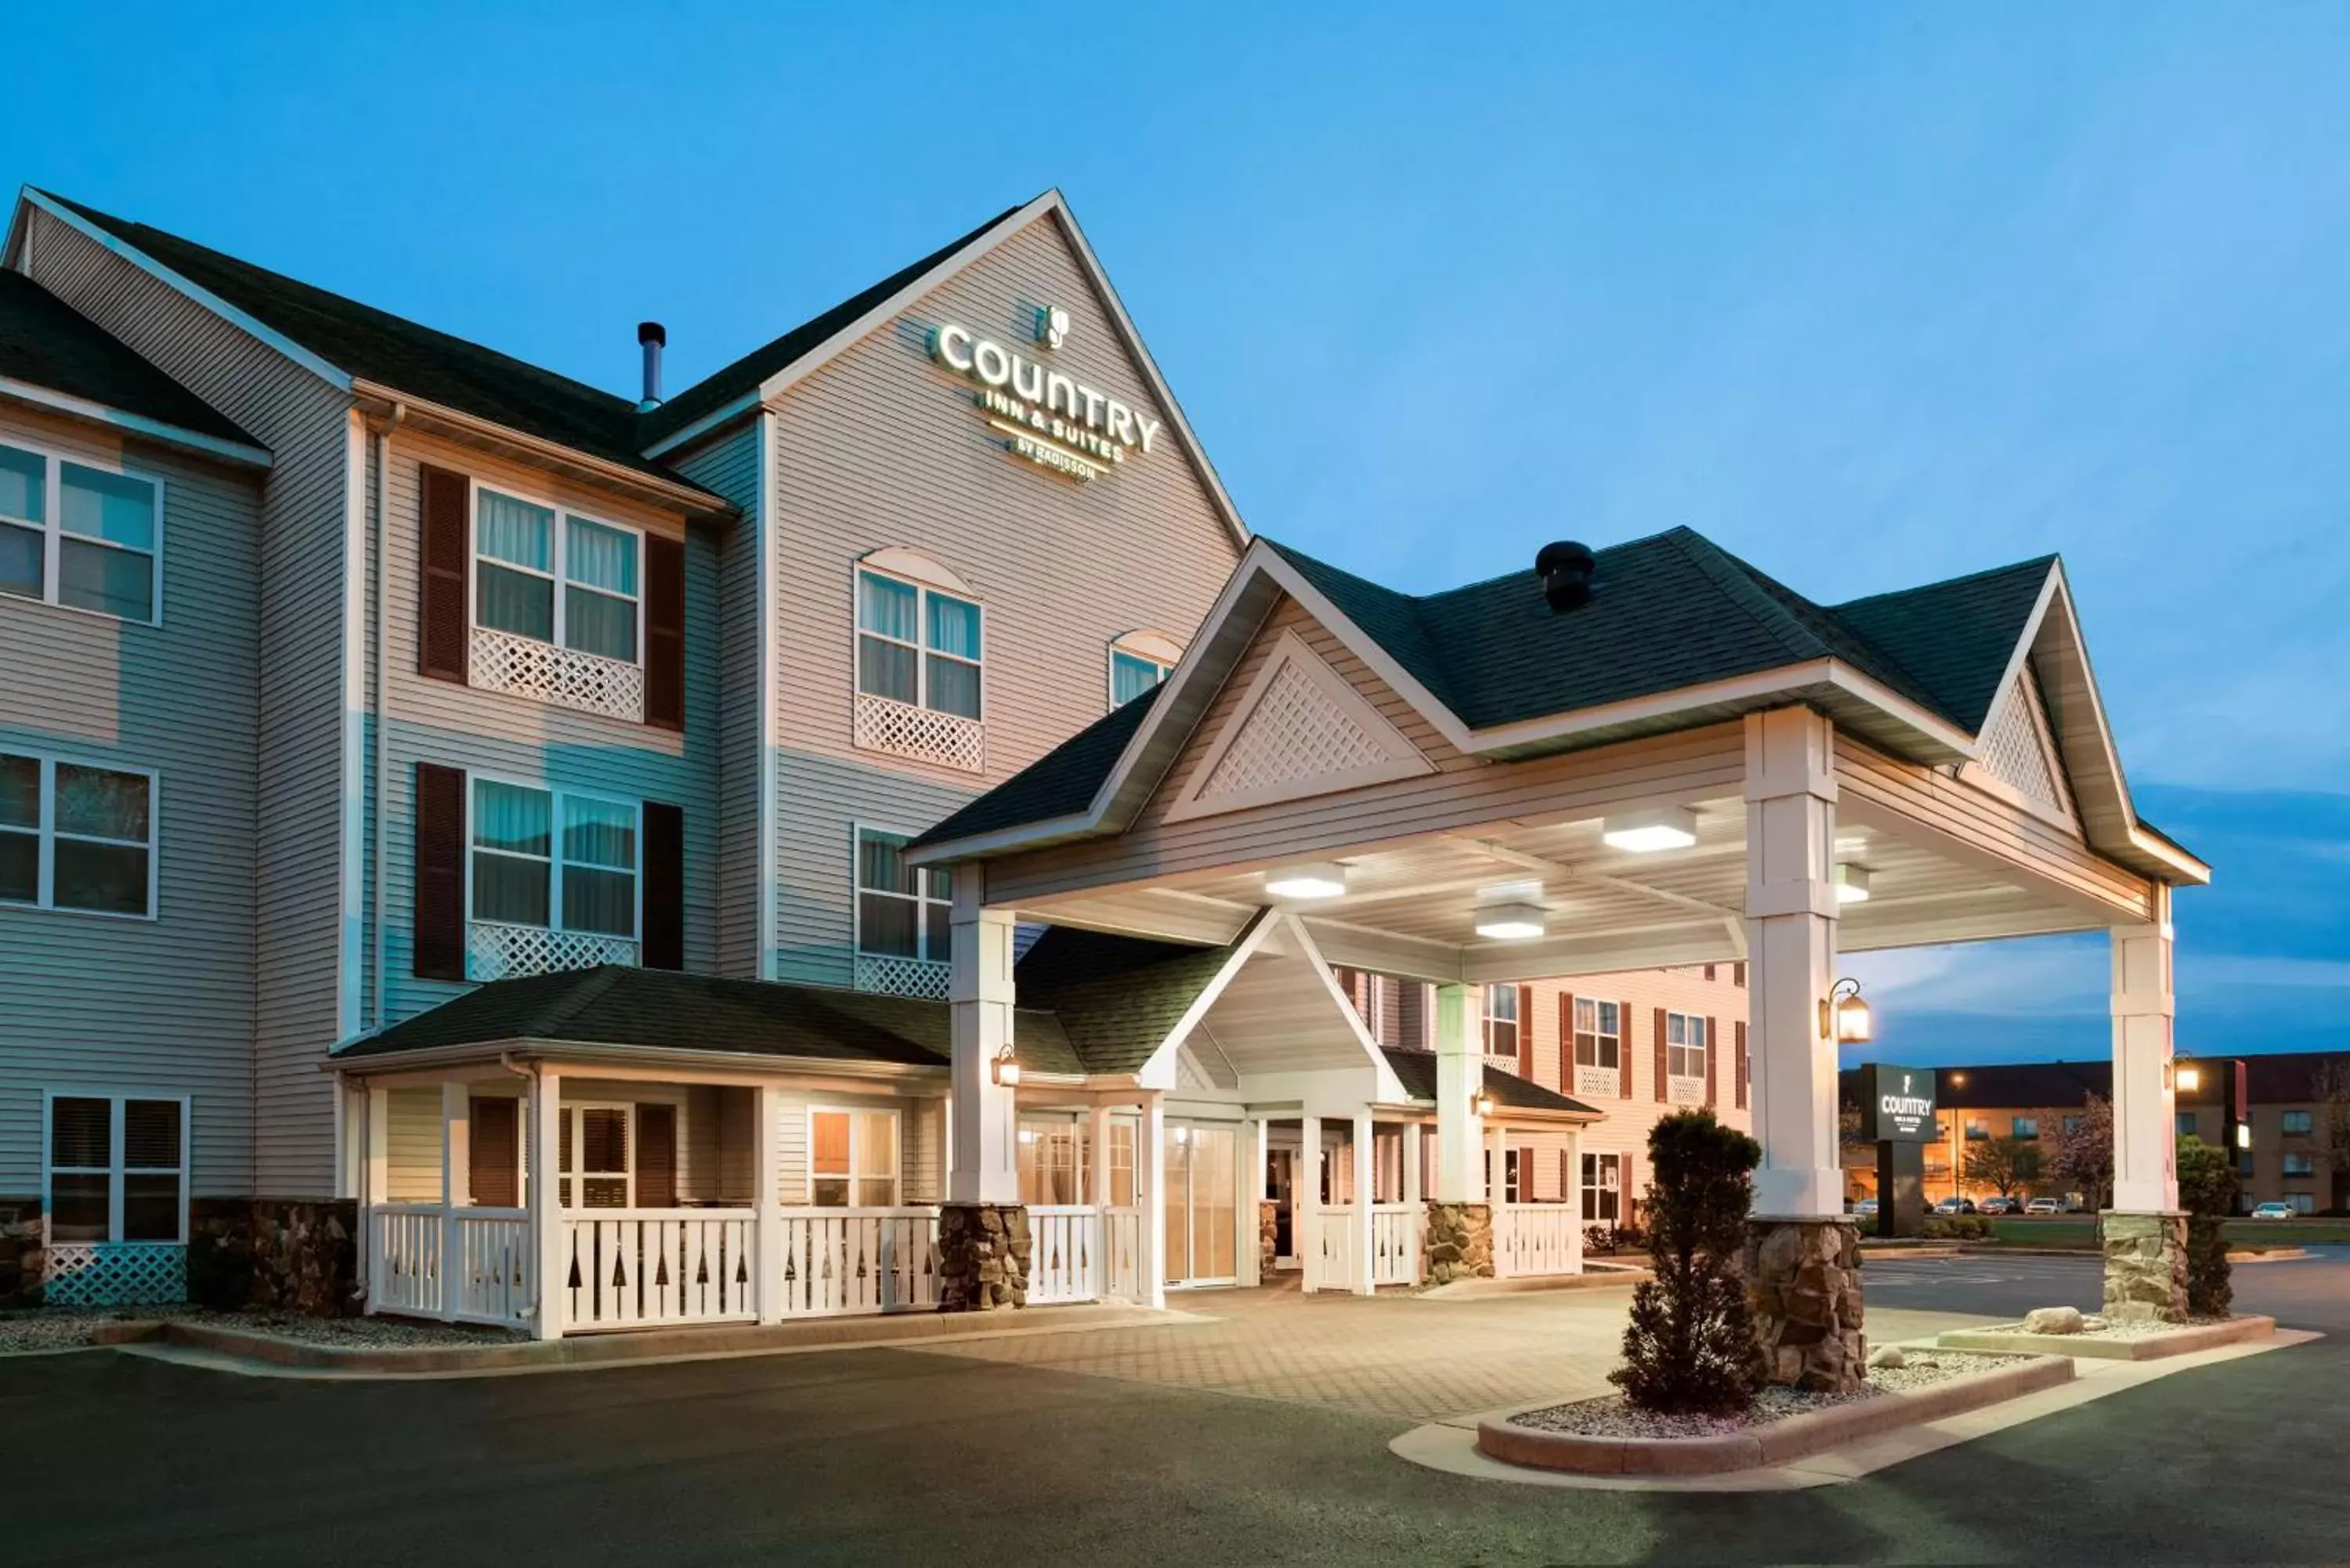 Property building in Country Inn & Suites by Radisson, Stevens Point, WI